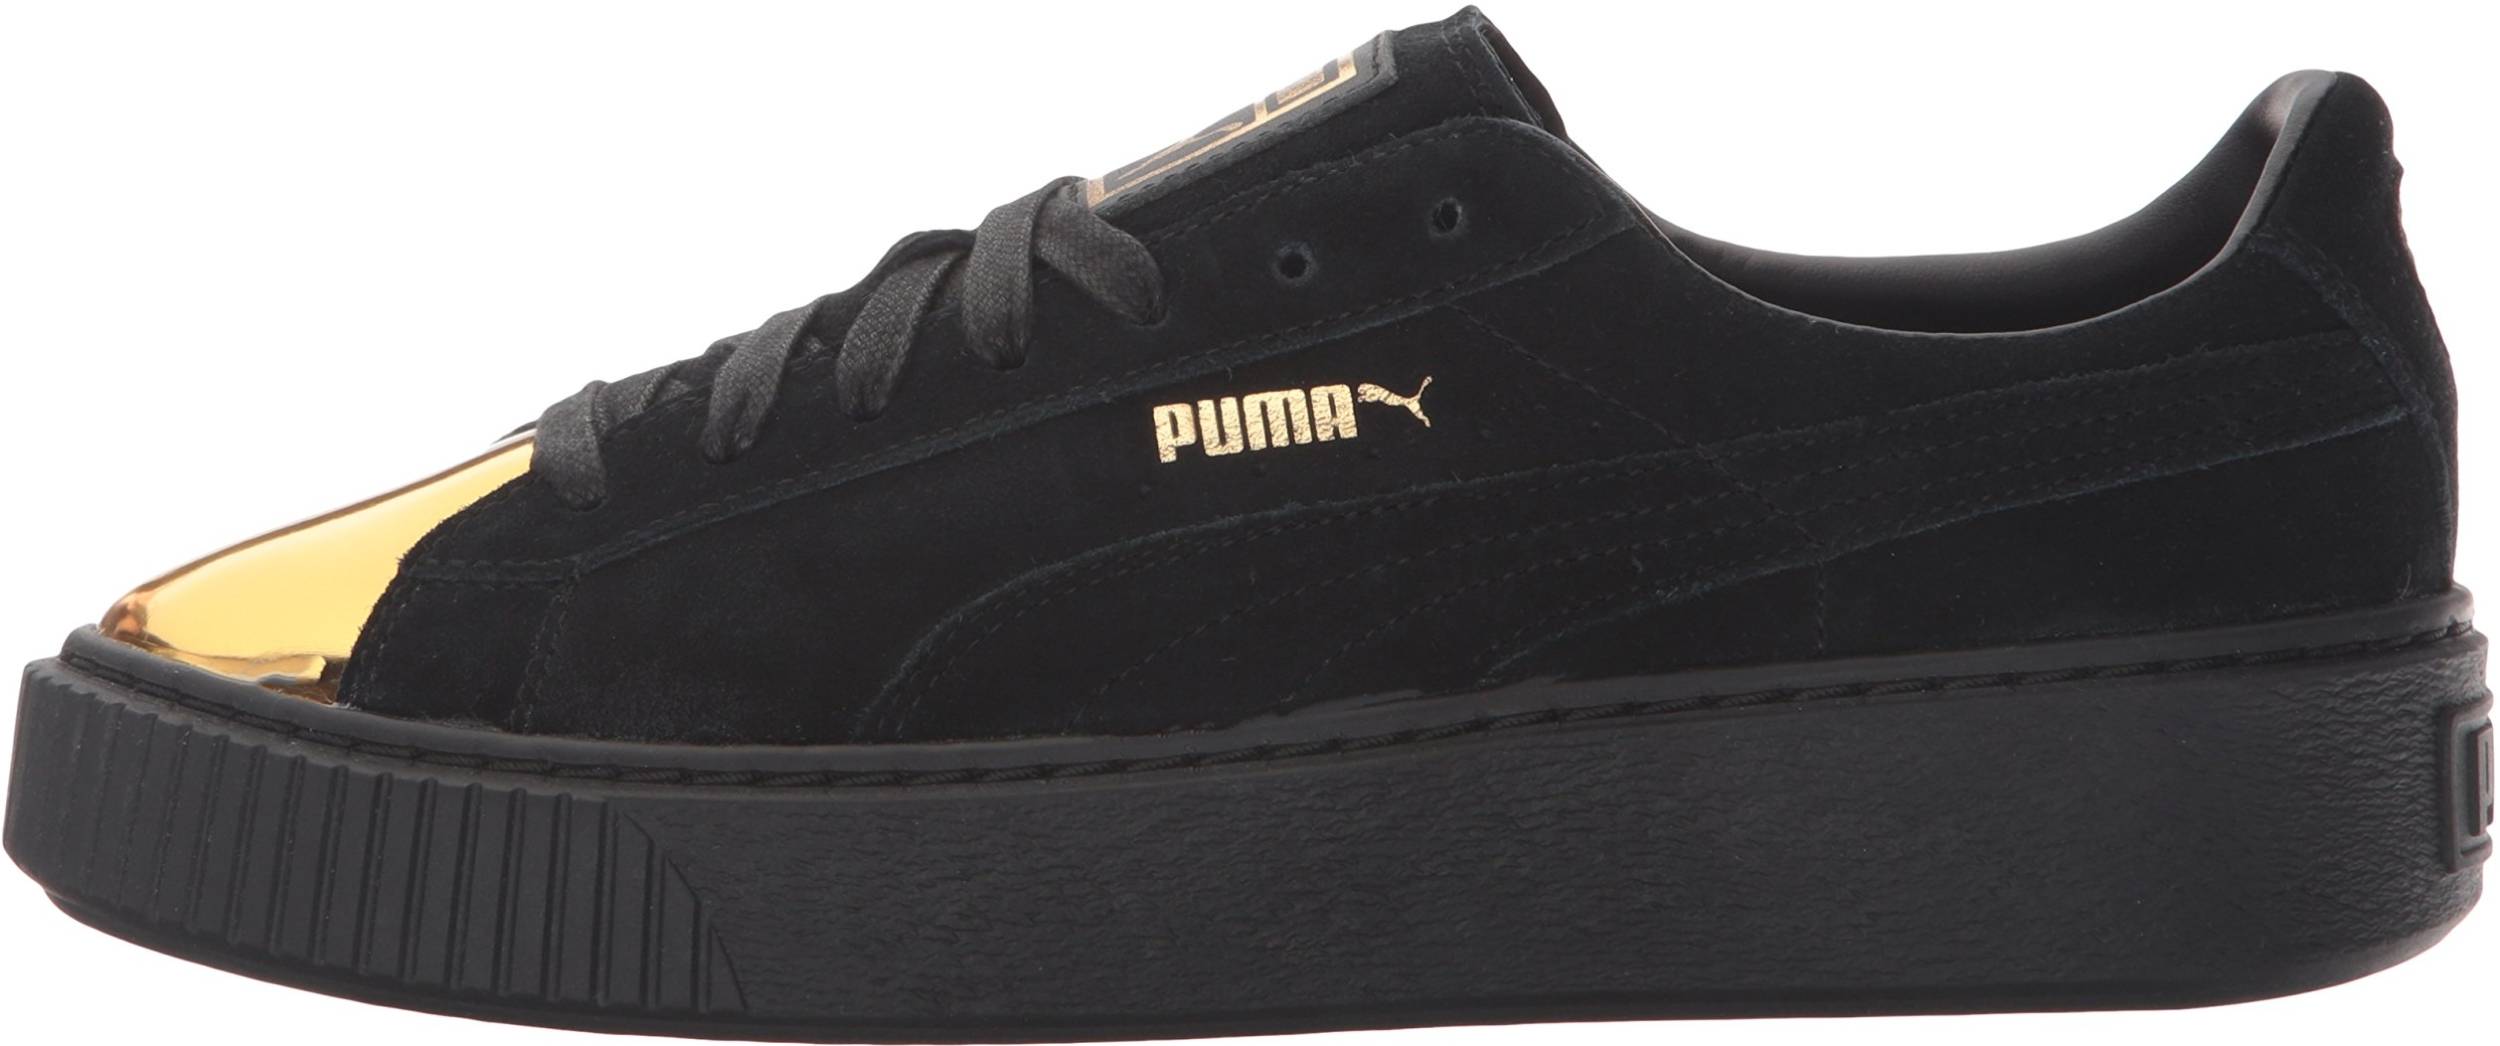 black and gold pumas women